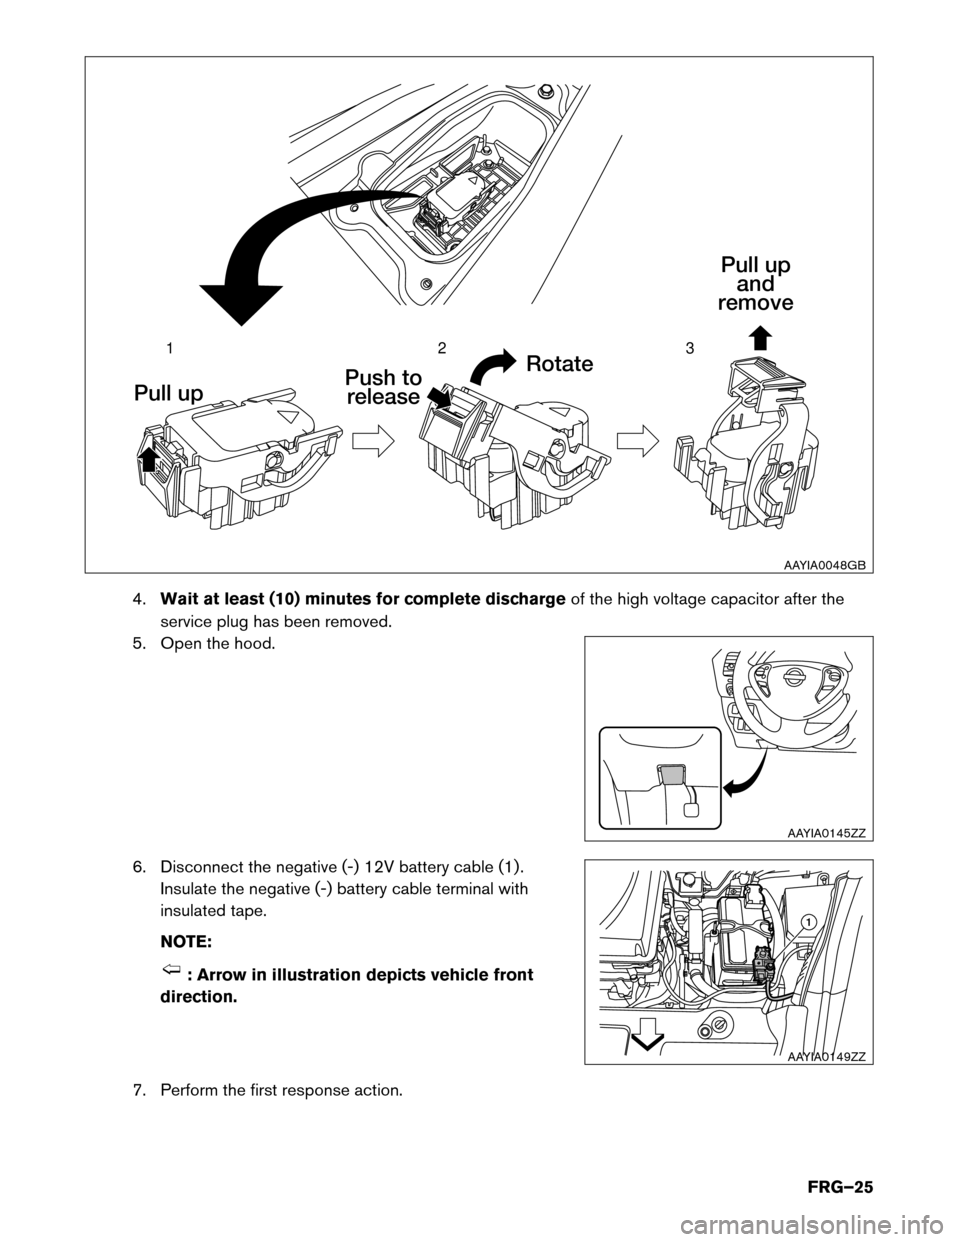 NISSAN LEAF 2014 1.G First Responders Guide 4.
Waitat least (10) minutes for complete discharge of the high voltage capacitor after the
service plug has been removed.
5. Open the hood.
6. Disconnect the negative (-) 12V battery cable (1) . Insu